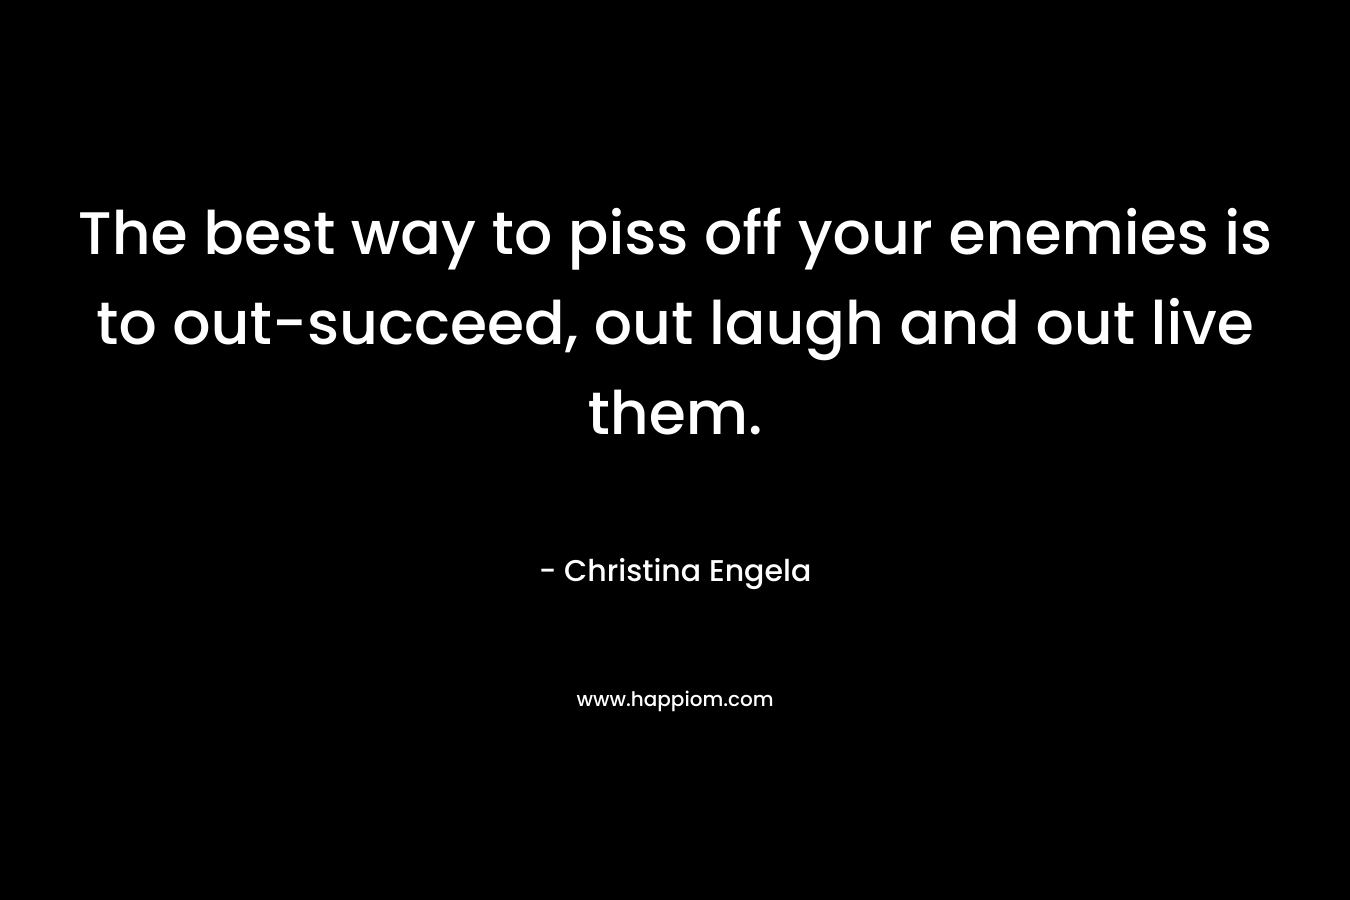 The best way to piss off your enemies is to out-succeed, out laugh and out live them.